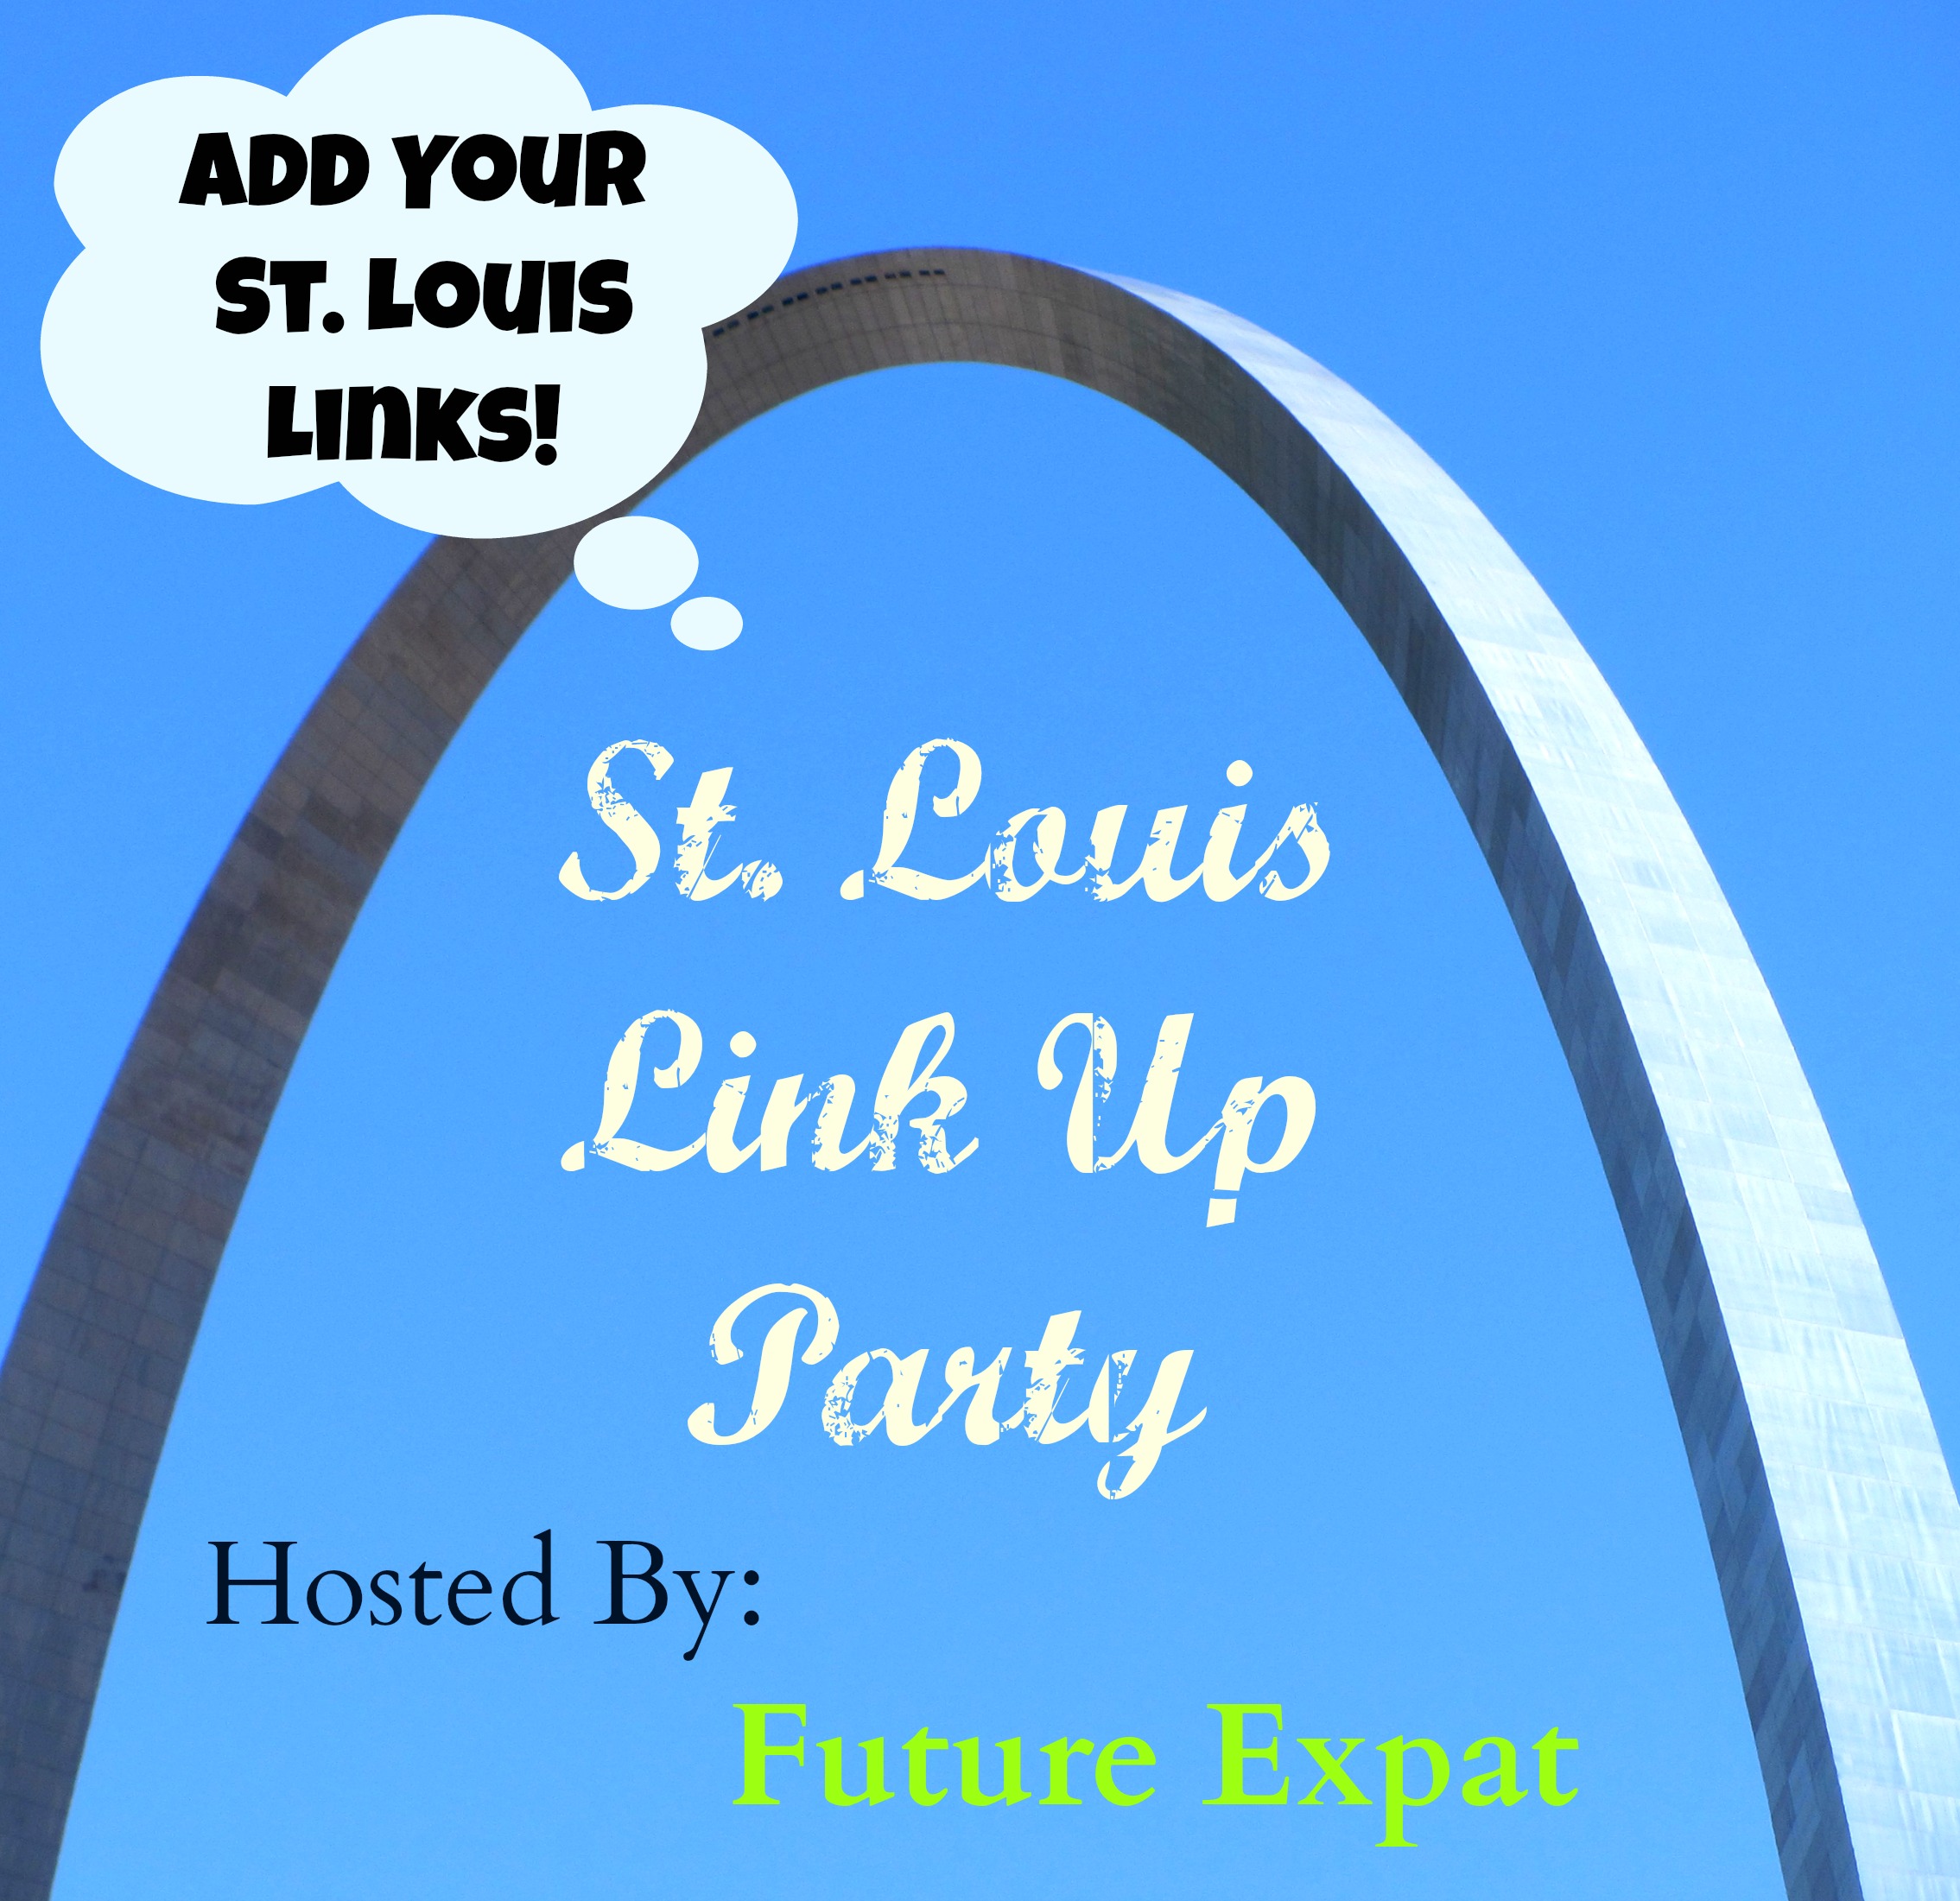 Join the St. Louis Link Up Party